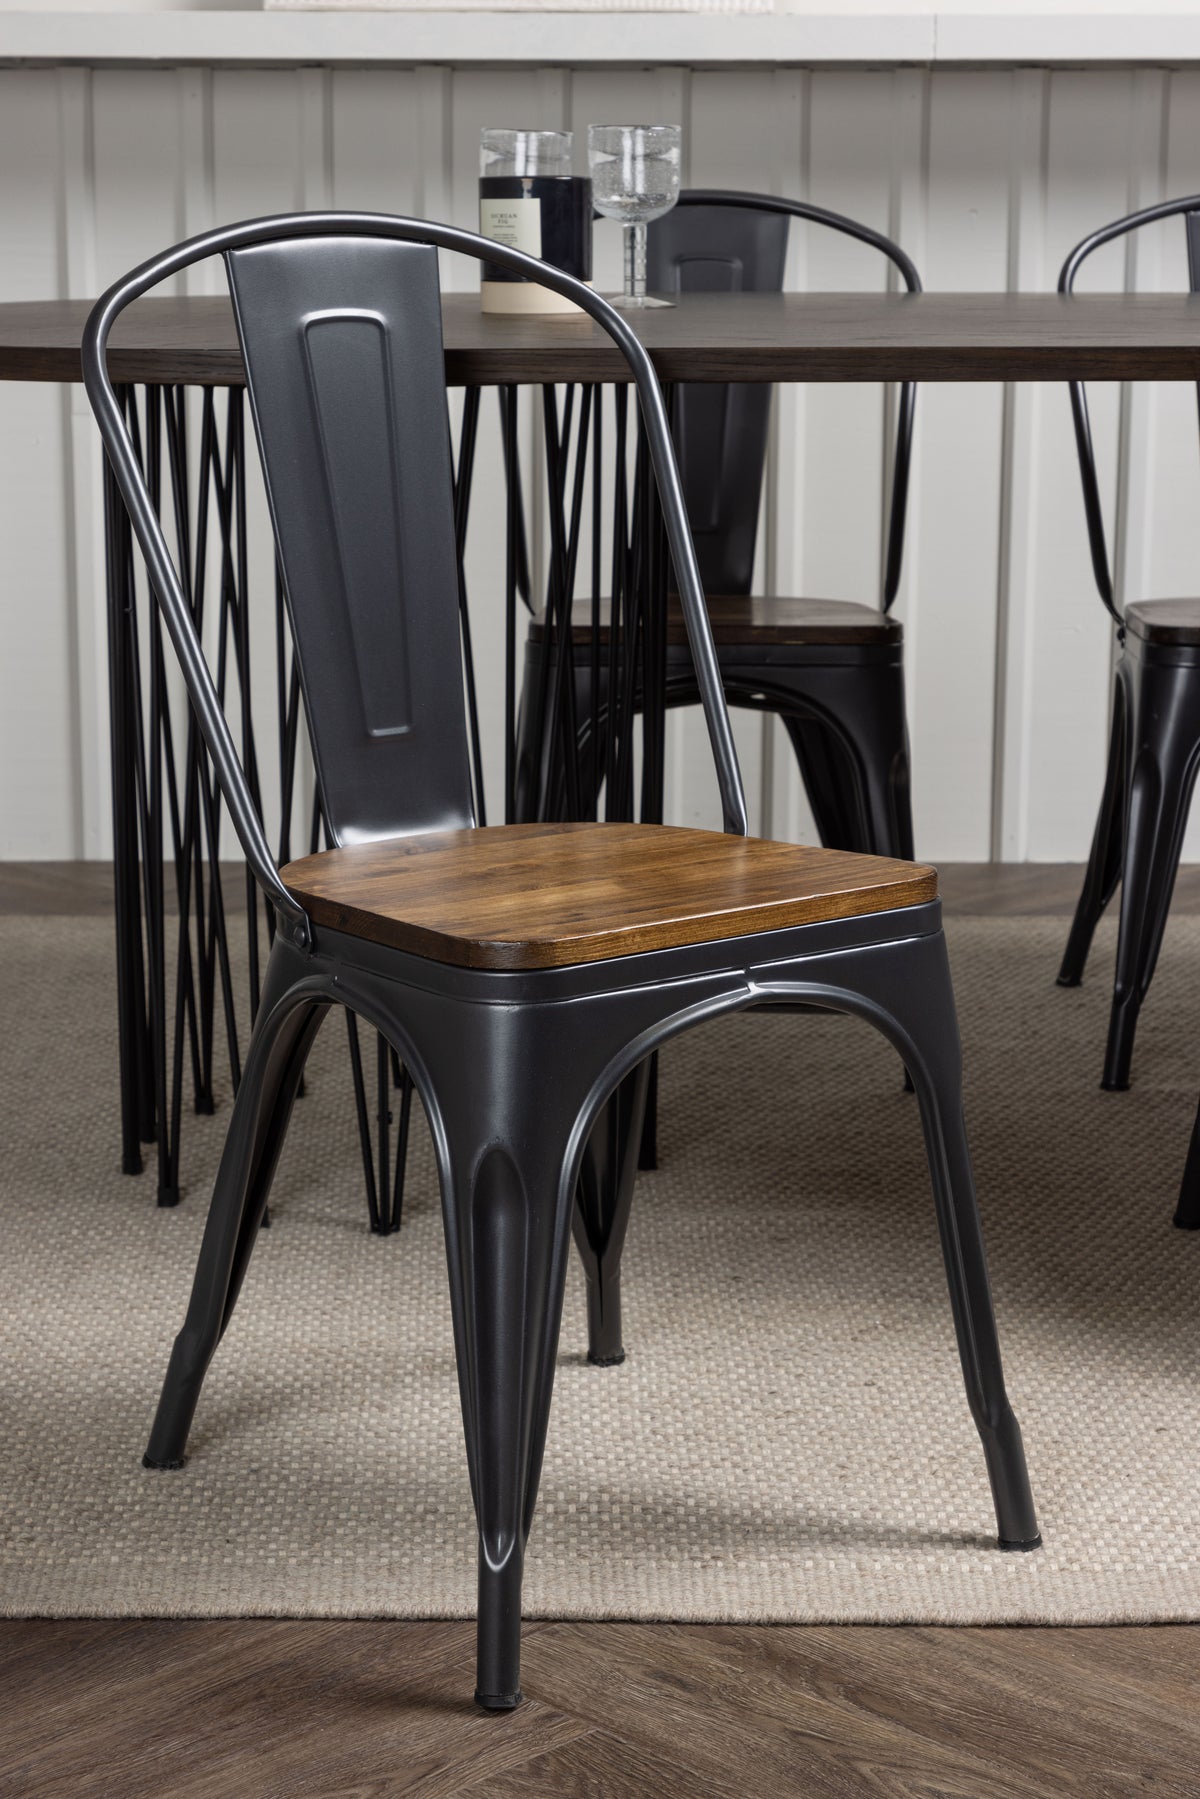 Dining Set Stone with the chairs Tempe - Pakke med 4